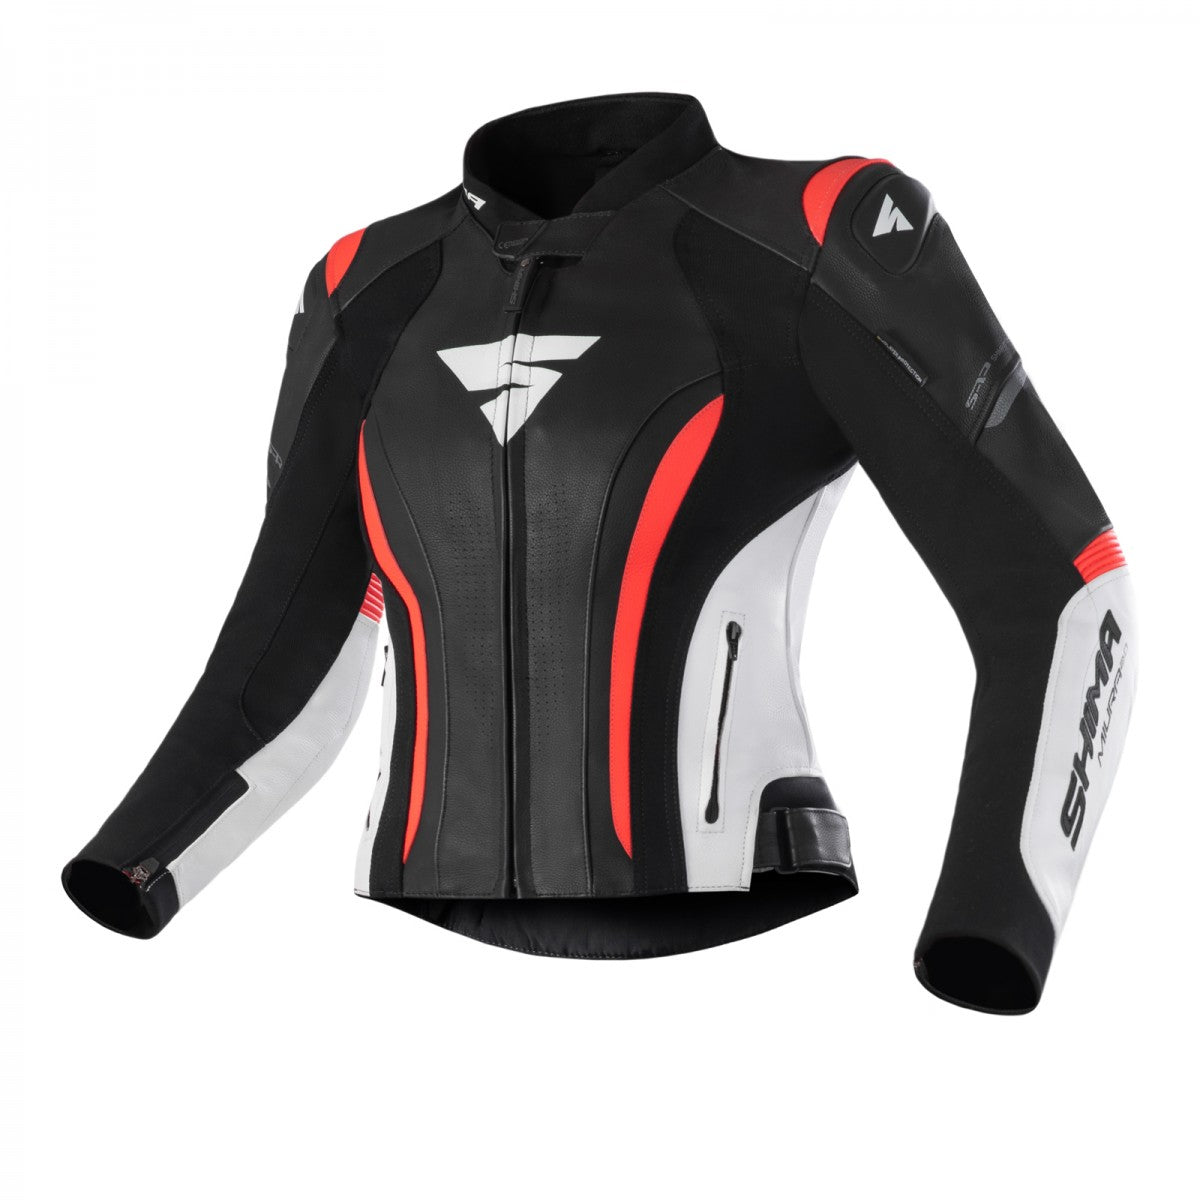 SHIMA MOTORCYCLE LEATHER JACKET IN BLACK FLUO, WHITE AND RED FLUO